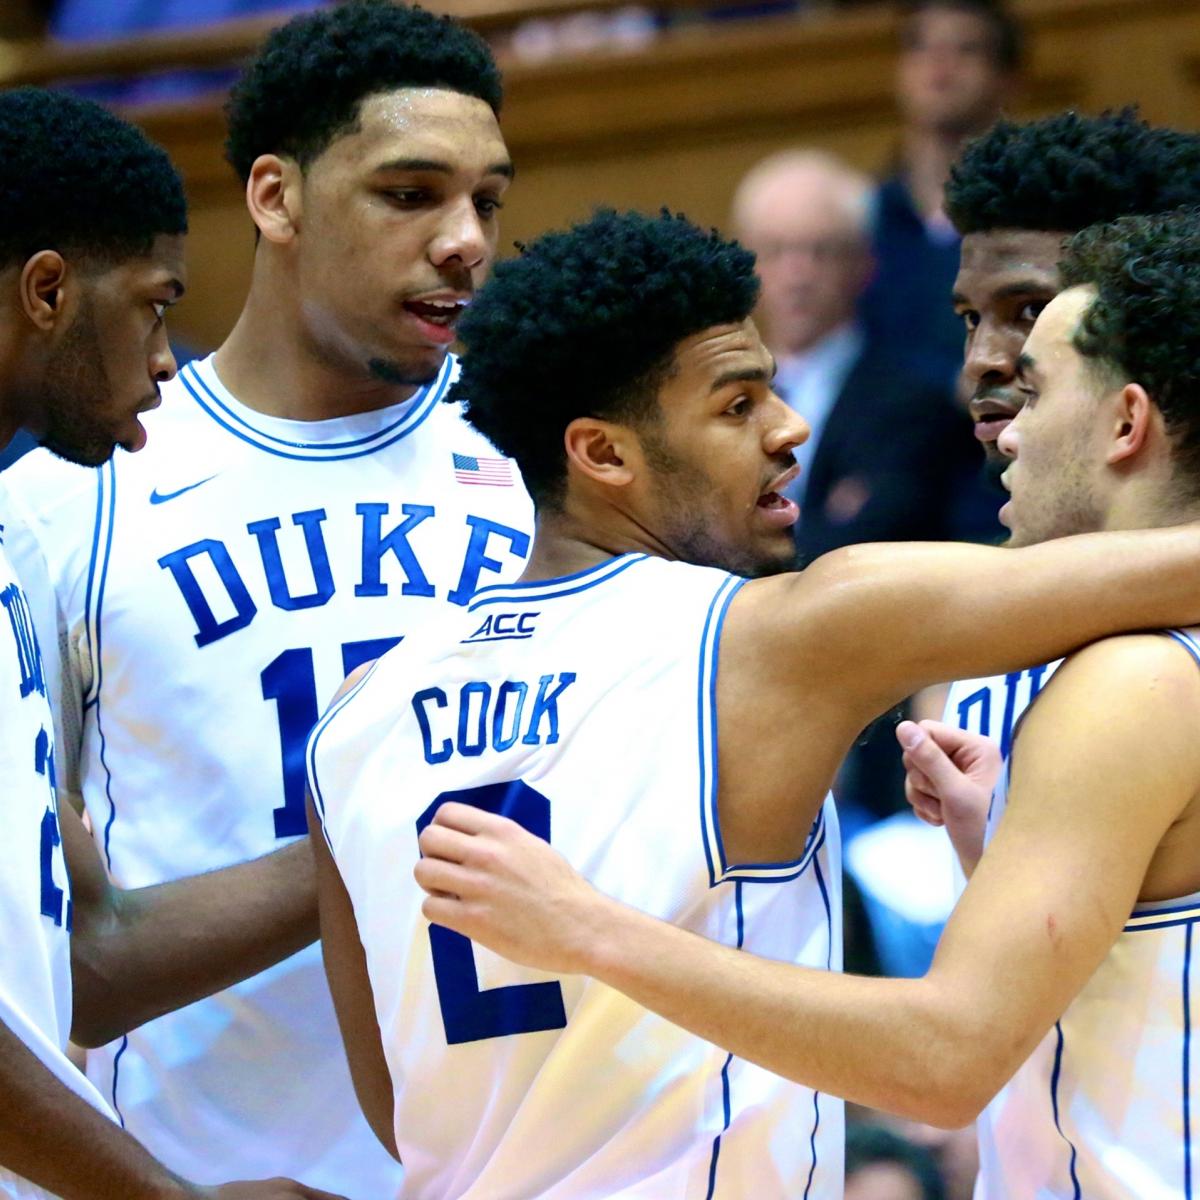 Package deal Tyus Jones and Jahlil Okafor came to Duke to win a